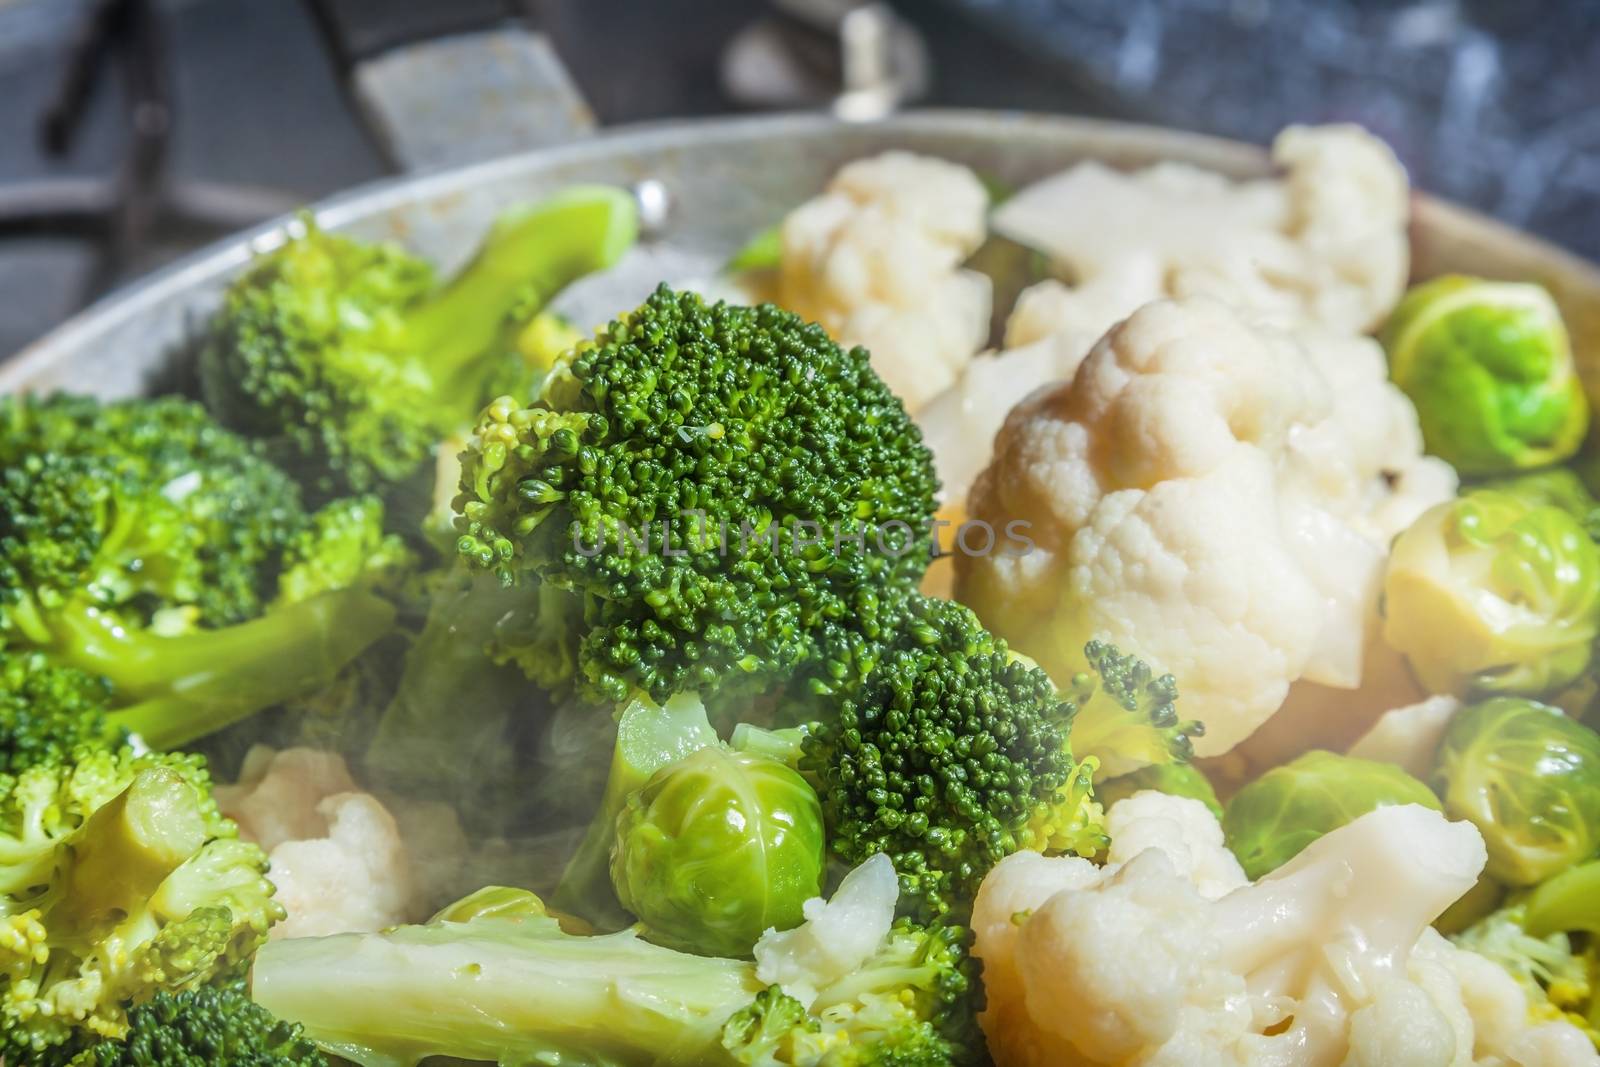 preparation of a dish of broccoli, diet healthy food background